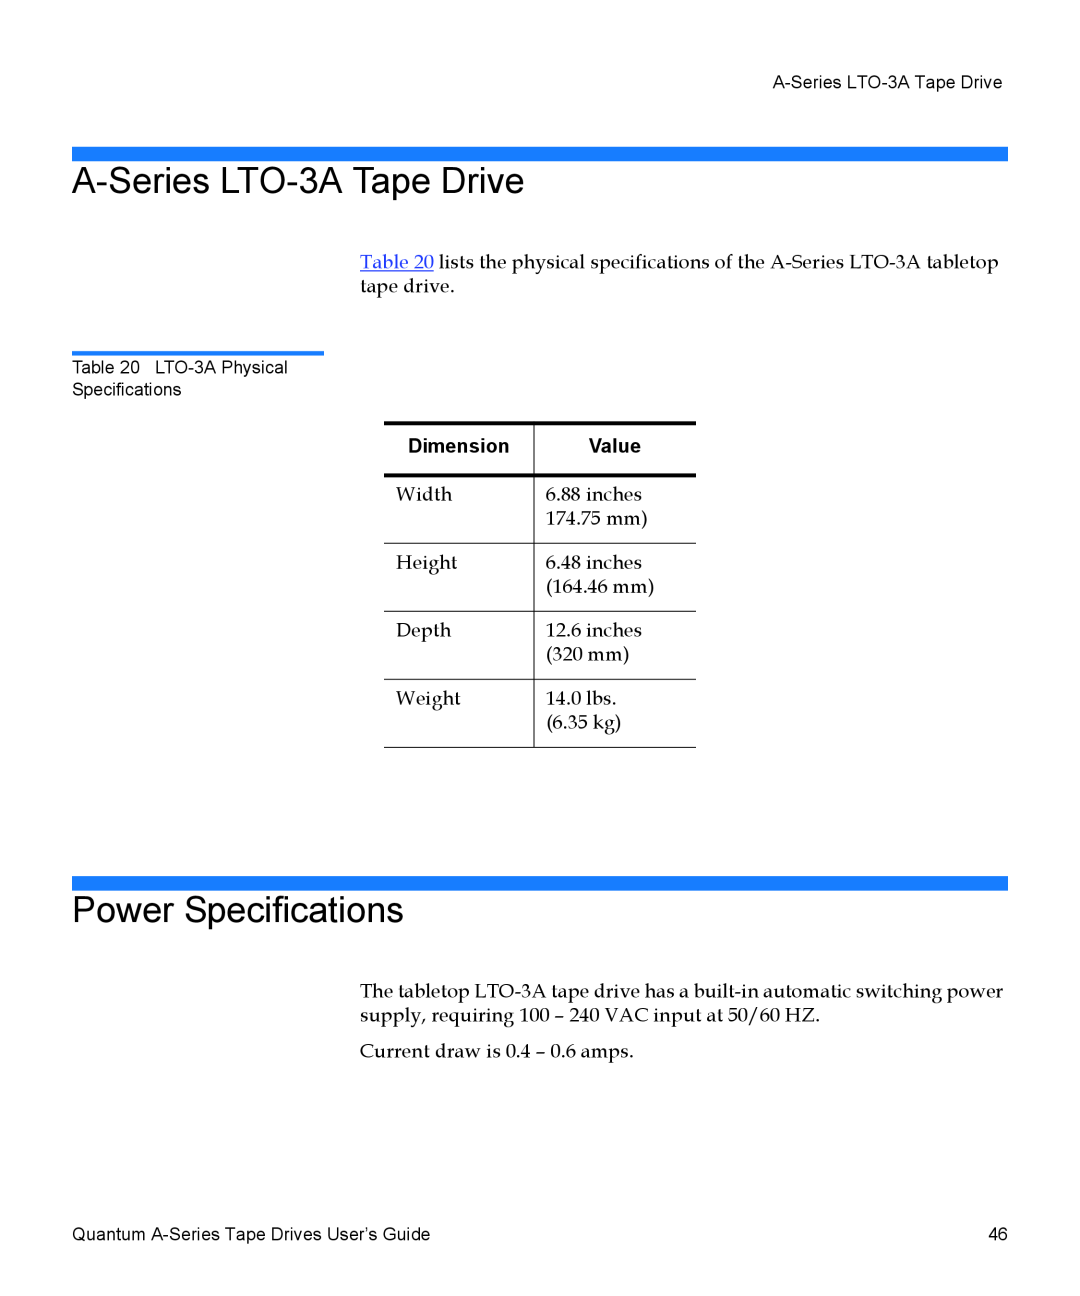 Quantum manual A-Series LTO-3A Tape Drive, Power Specifications, Dimension, Value 